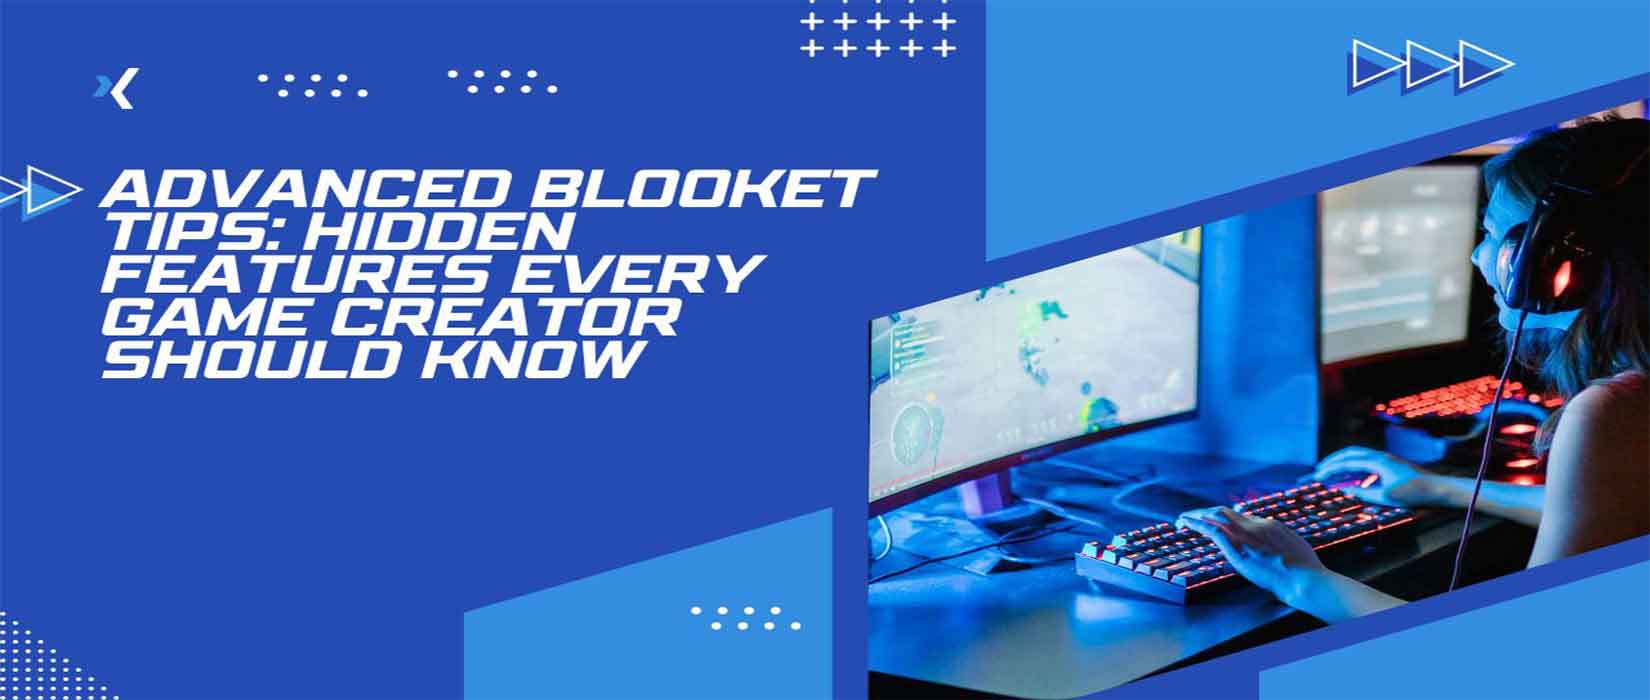 Advanced Blooket Tips: Hidden Features Every Game Creator Should Know